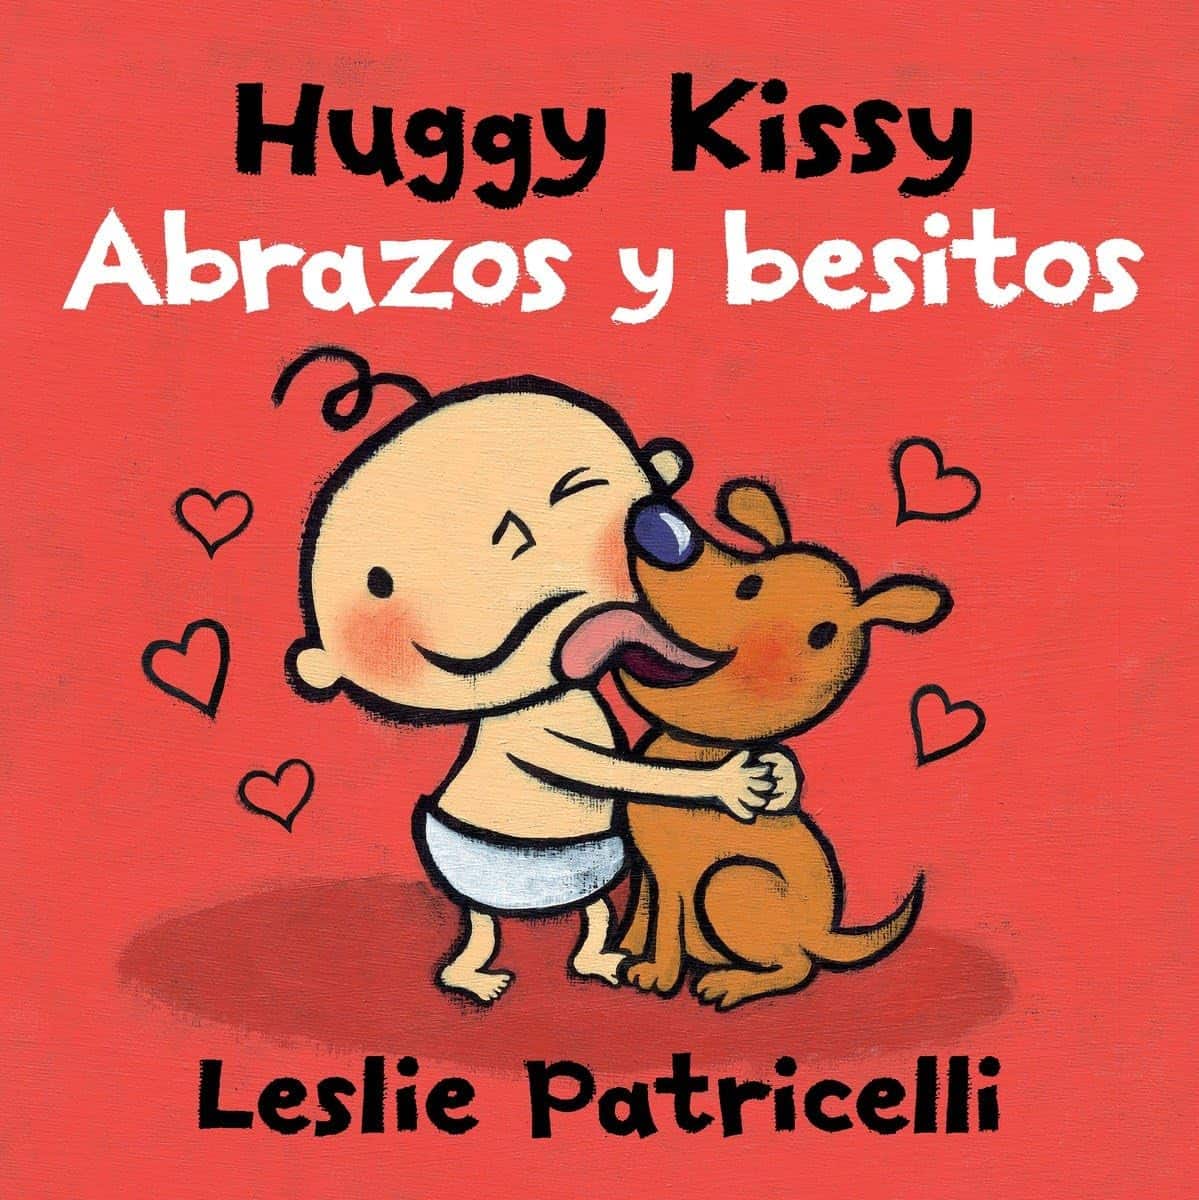 Huggy Kissy Abrazos y besitos by Leslie Patricelli